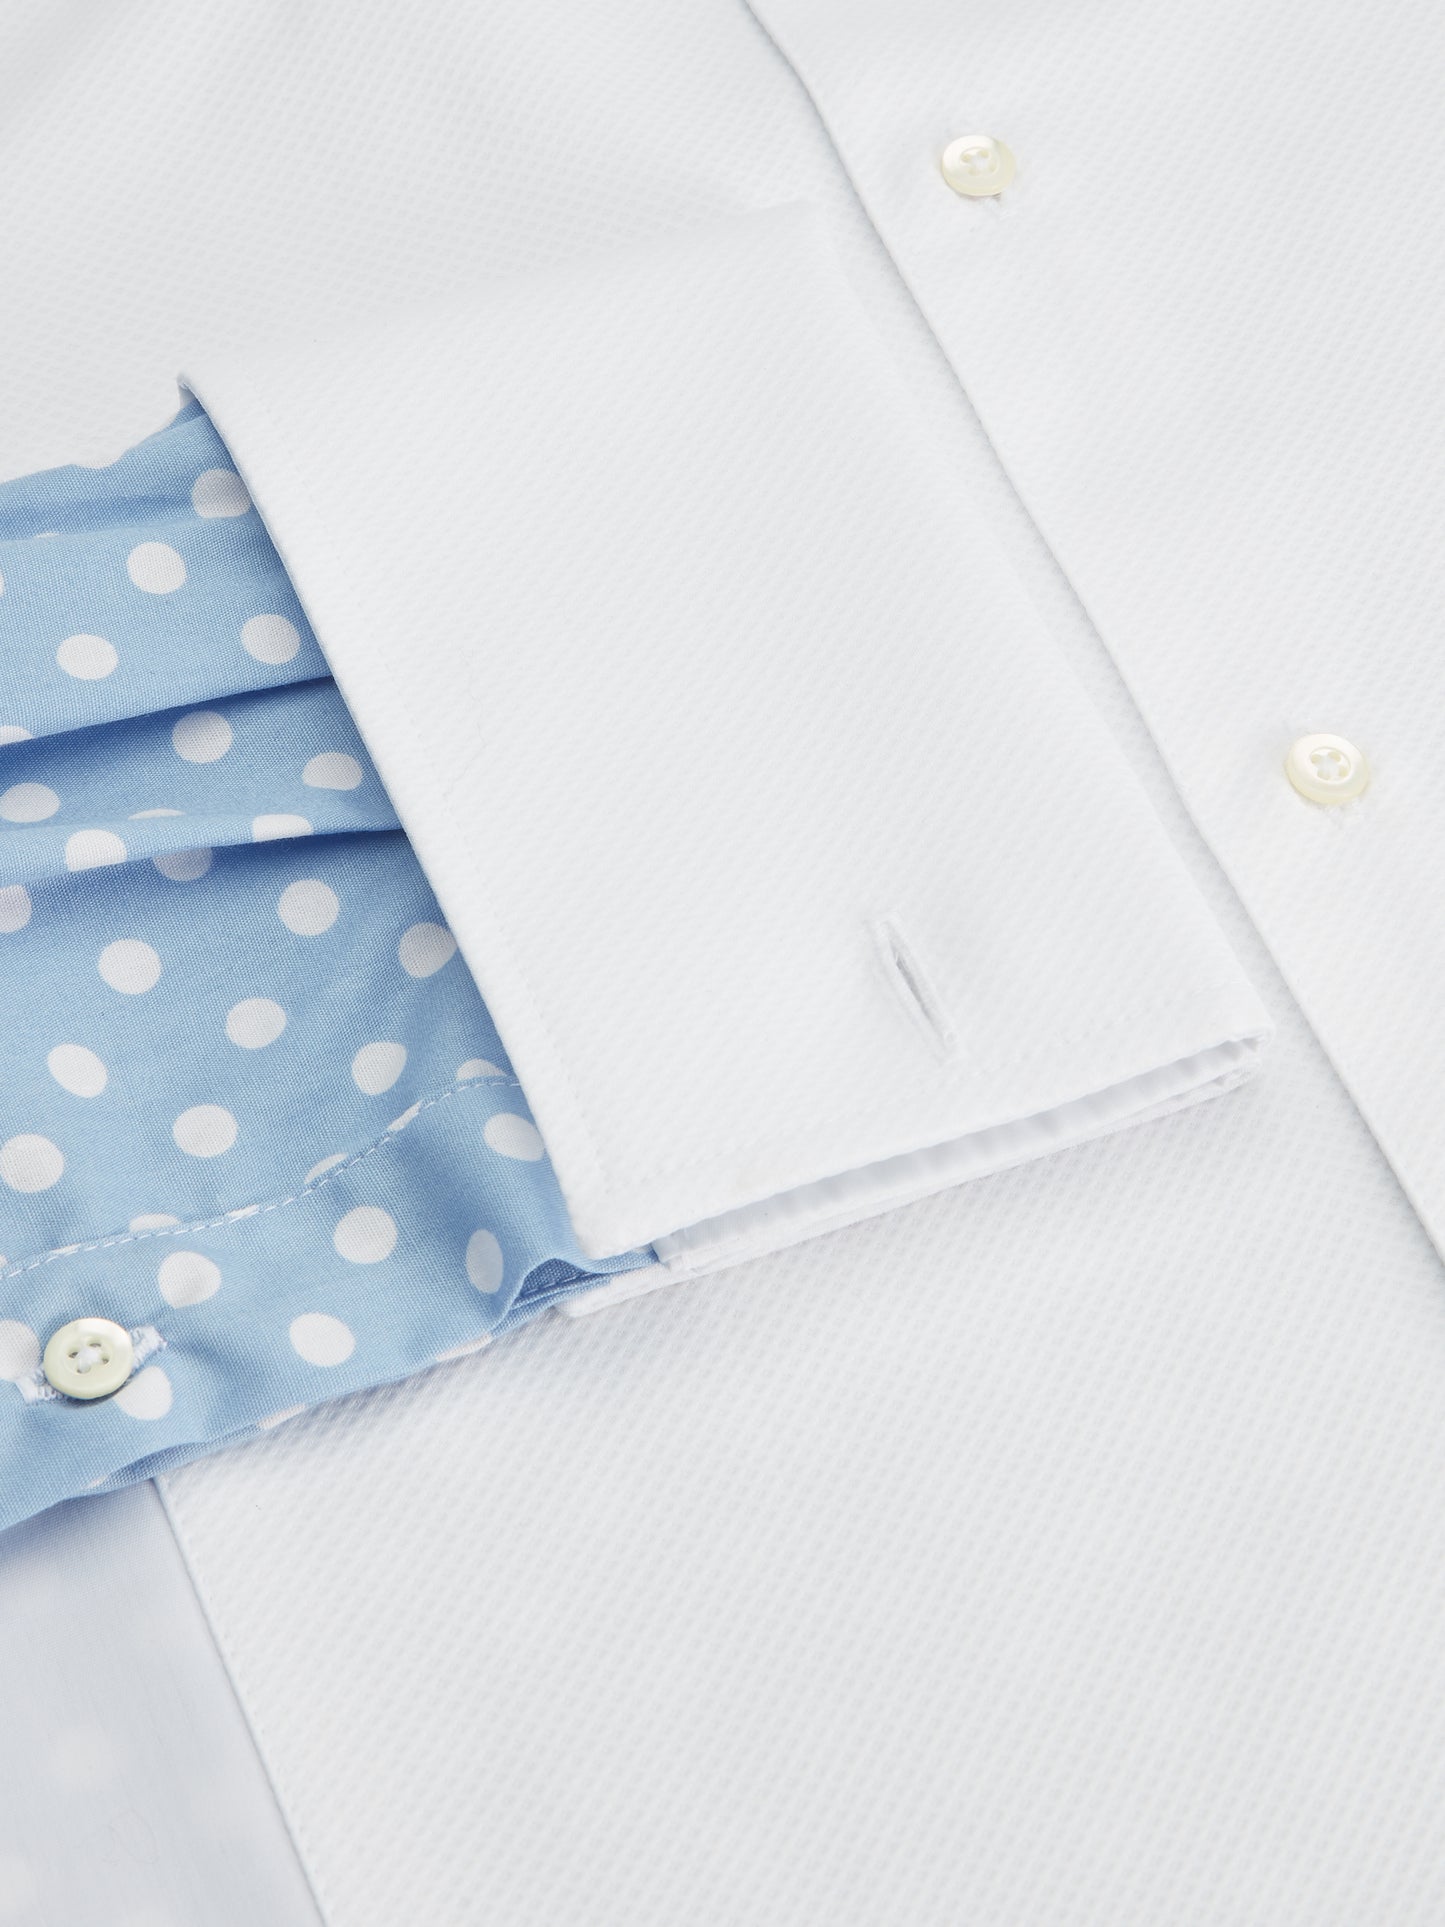 Fun Backed Marcella Dress Shirt - Spotted Blue